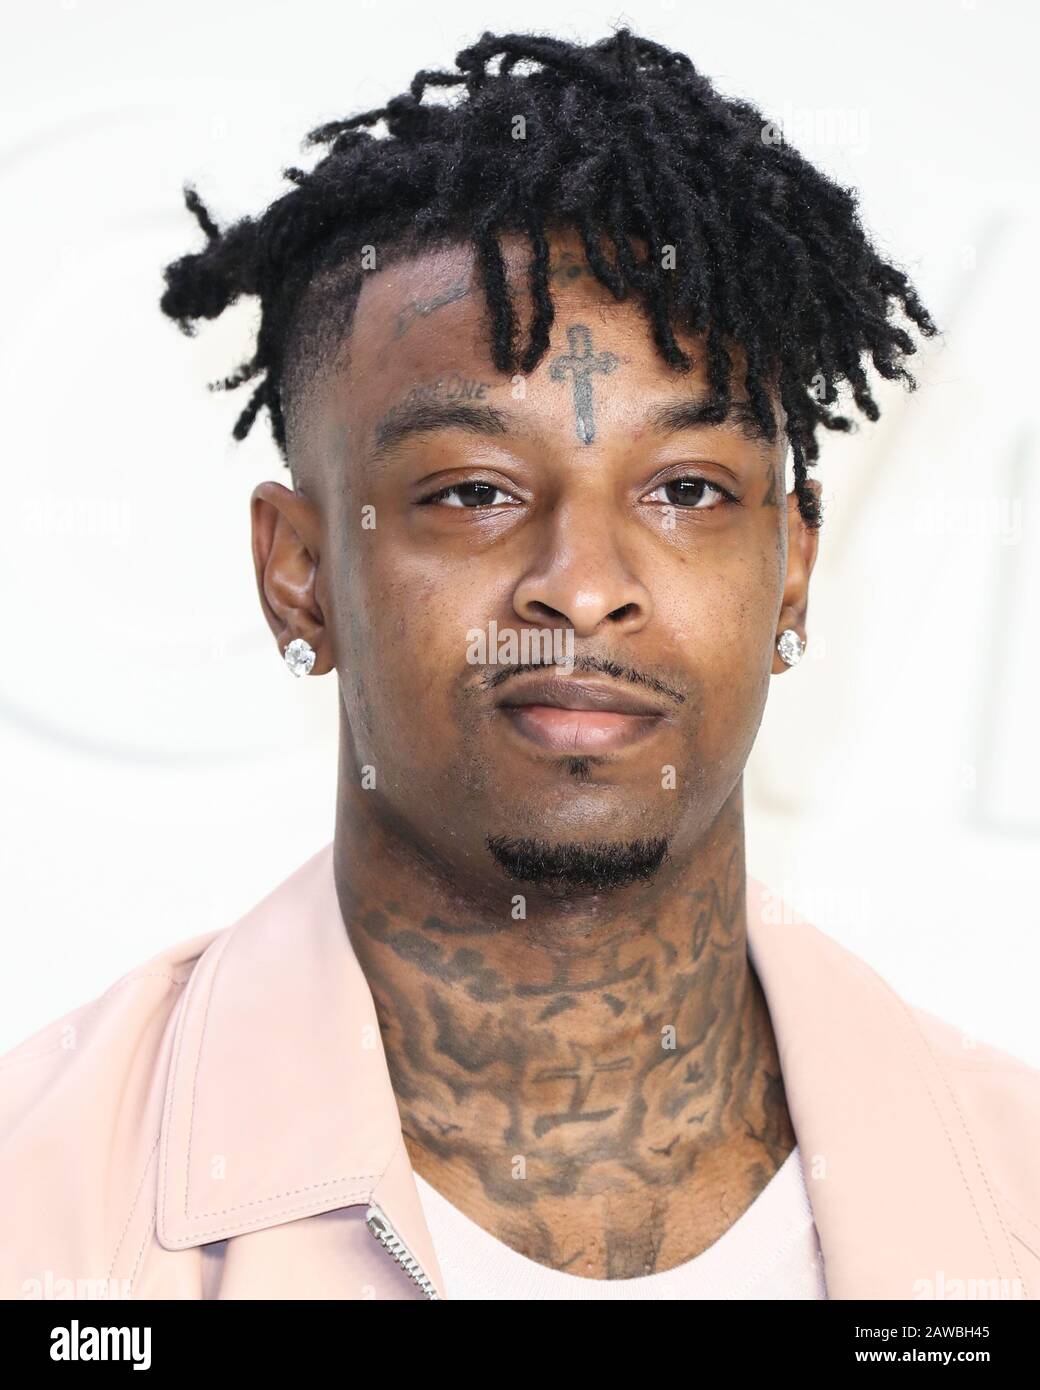 HOLLYWOOD, LOS ANGELES, CALIFORNIA, USA - FEBRUARY 07: 21 Savage arrives at  the Tom Ford: Autumn/Winter 2020 Fashion Show held at Milk Studios on  February 7, 2020 in Hollywood, Los Angeles, California